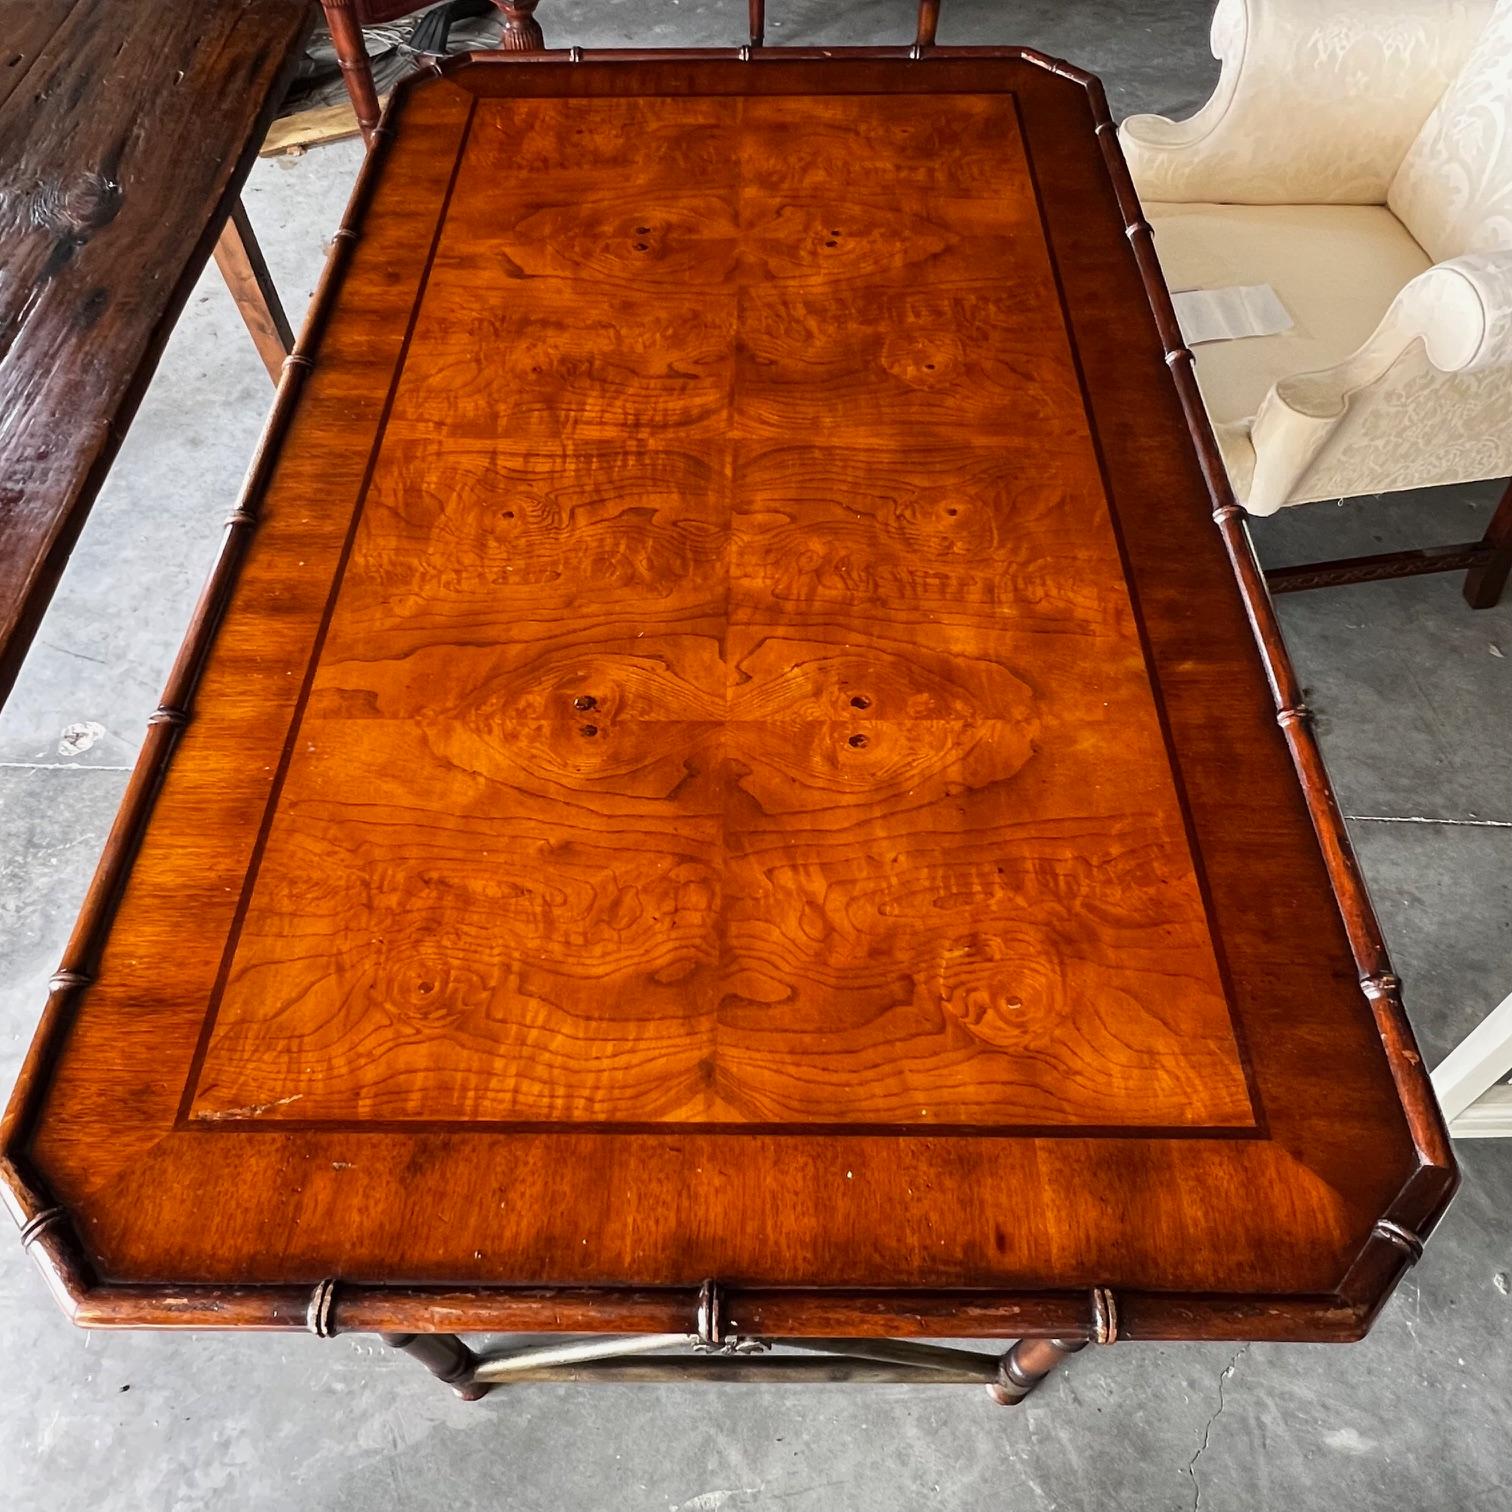 Ernest Hemingway style beautifully made desk or writing table with chinoiserie faux bamboo, burl wood inlay, finished back, and drawers (one opens for a keyboard)  The desk features a crotch flame mahogany veneer top with banded inlay border and